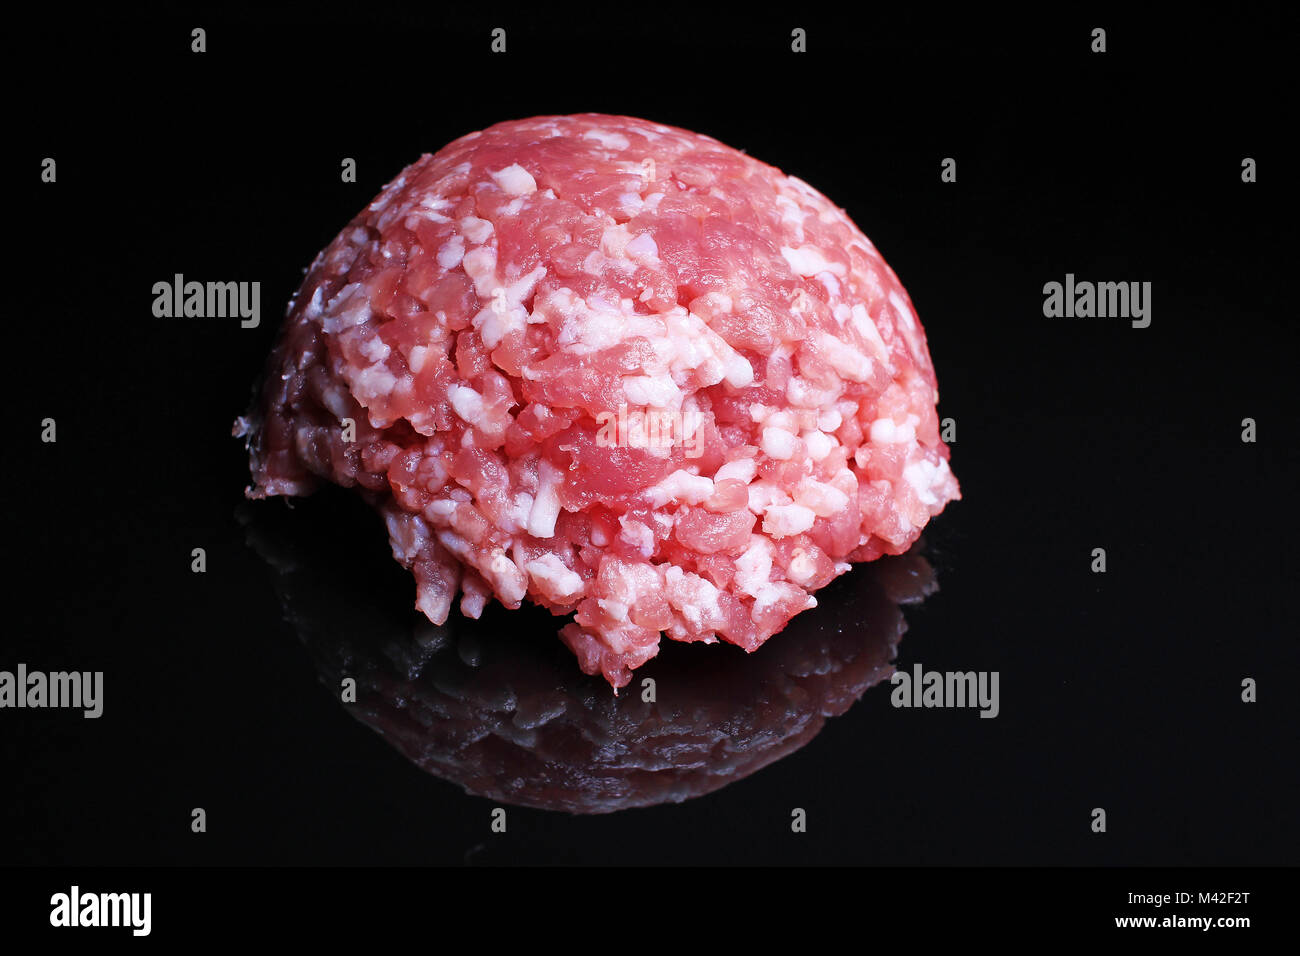 Minced meat. Raw pork meat on black reflective studio background. Isolated black shiny mirror mirrored background for every concept.. Stock Photo